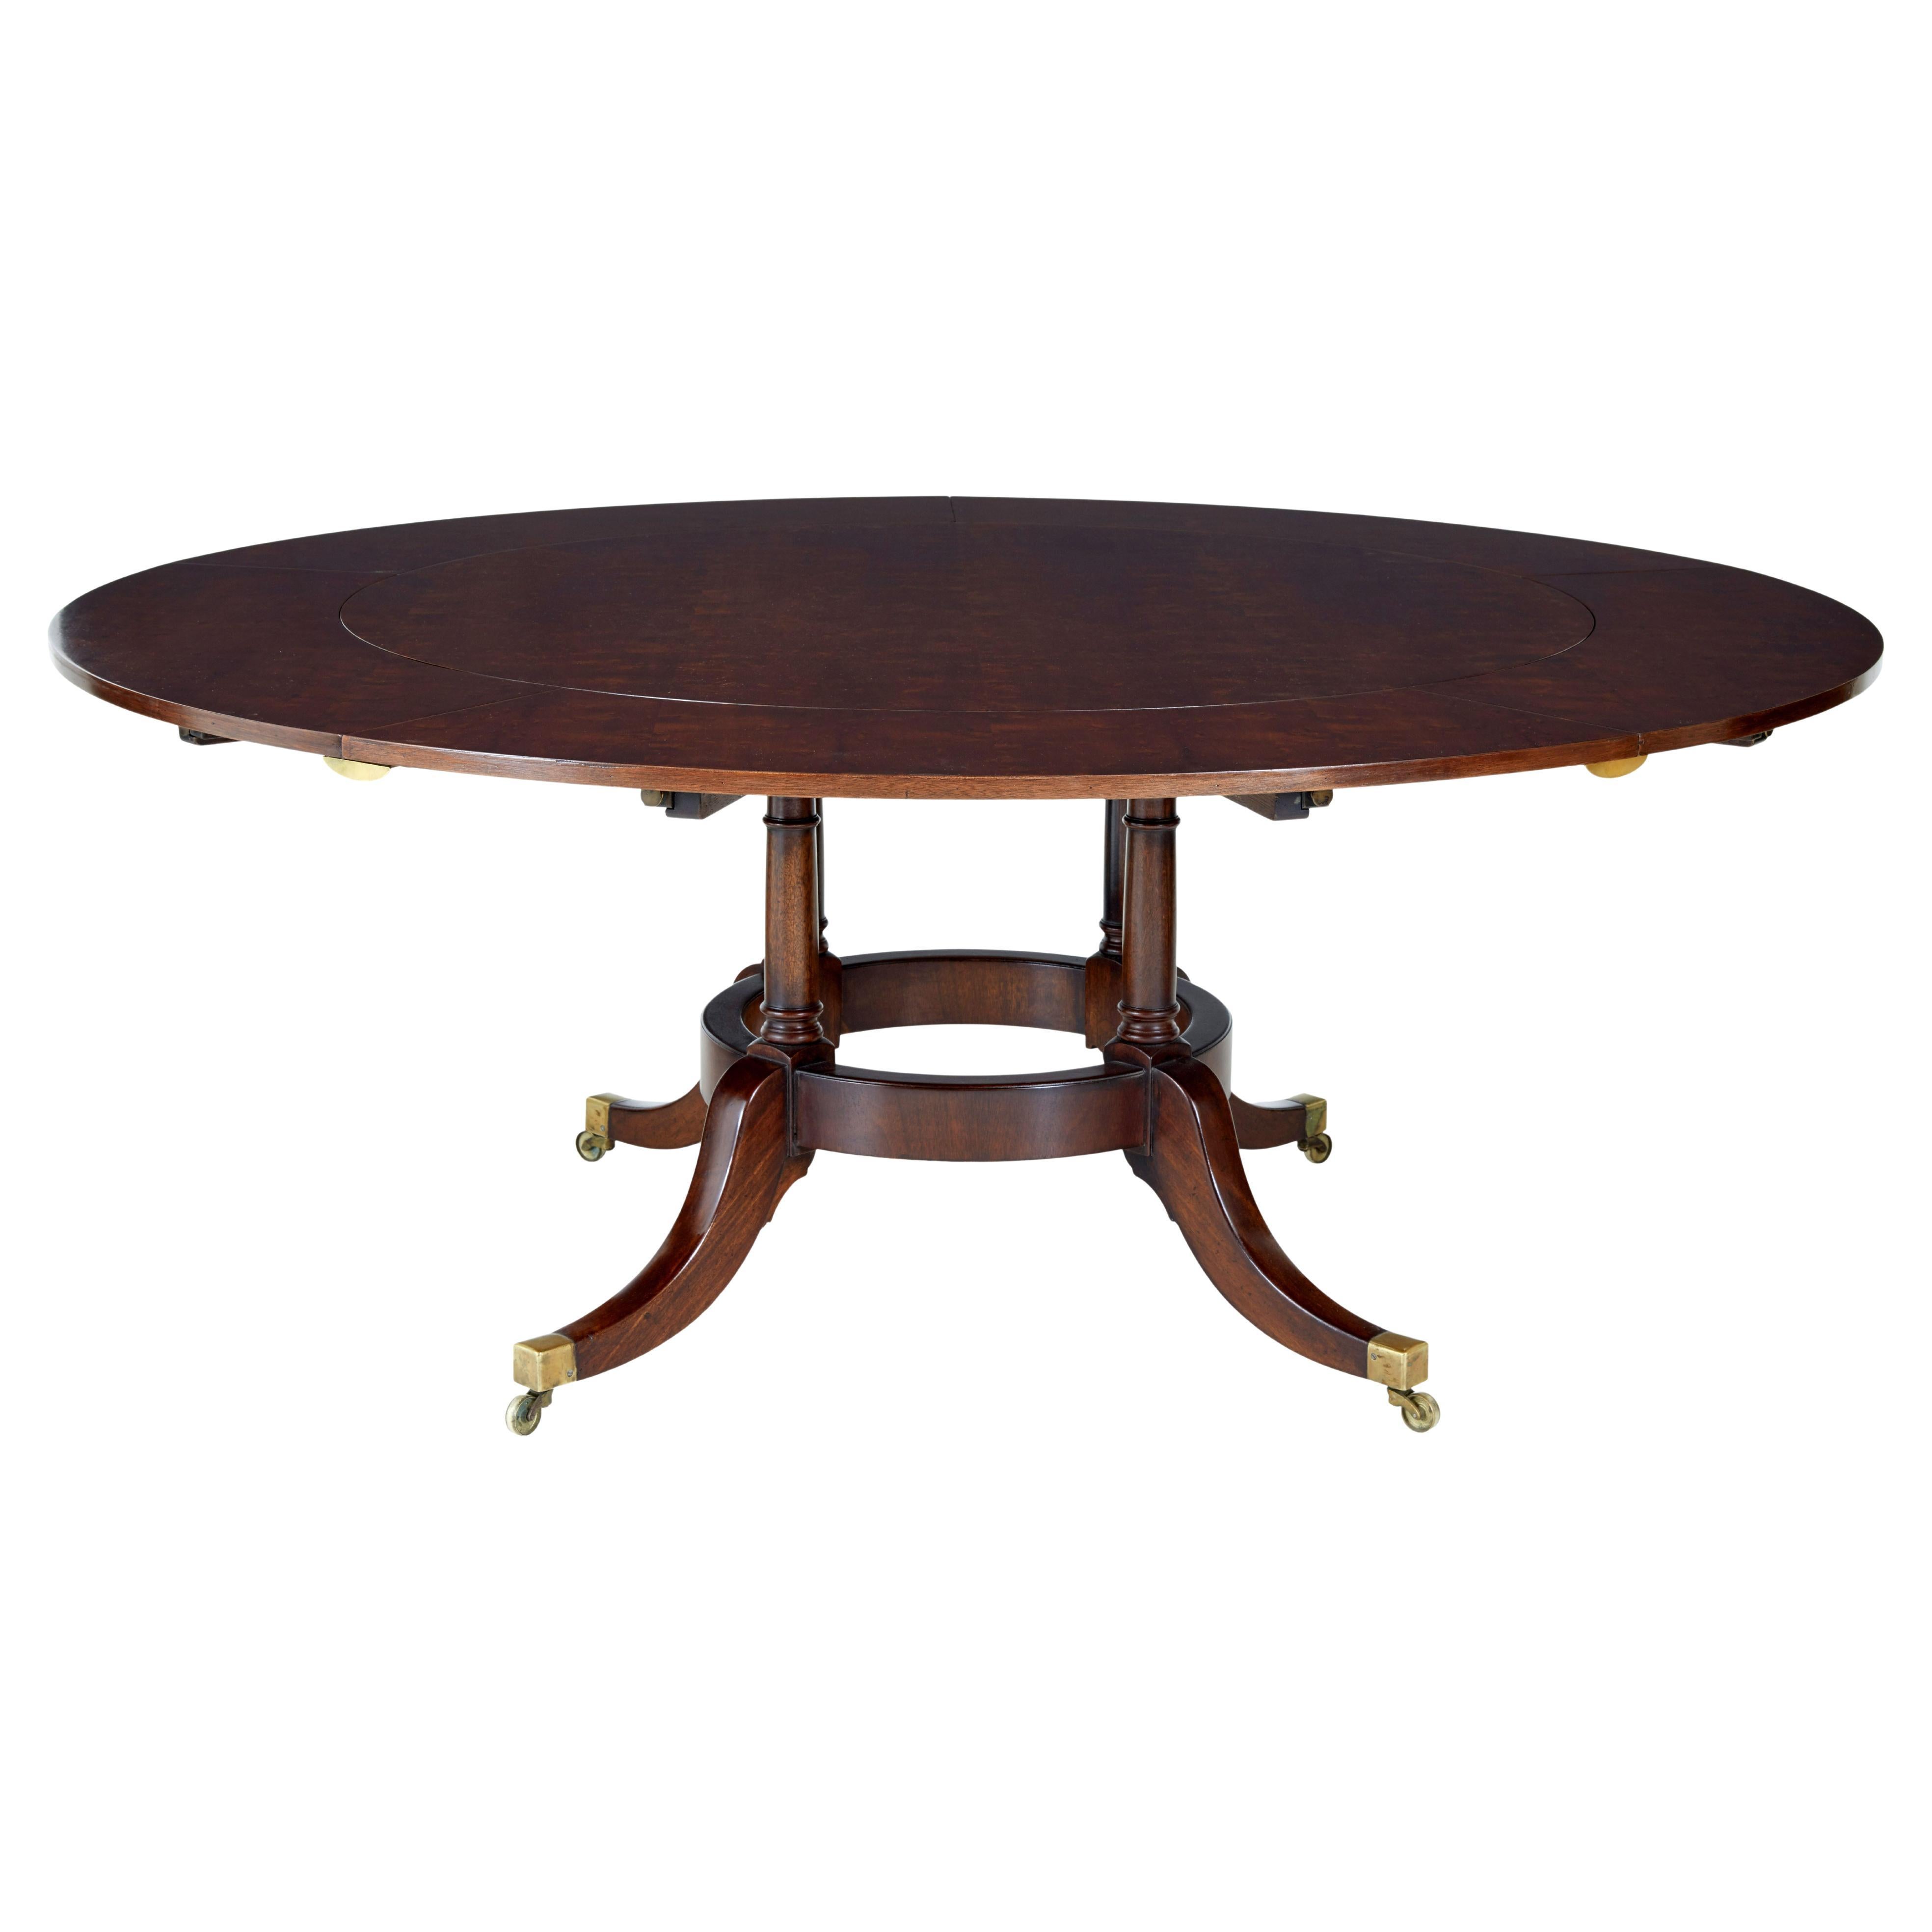 Late 20th Century Mahogany Jupe Dining Table with Leaf Cabinet